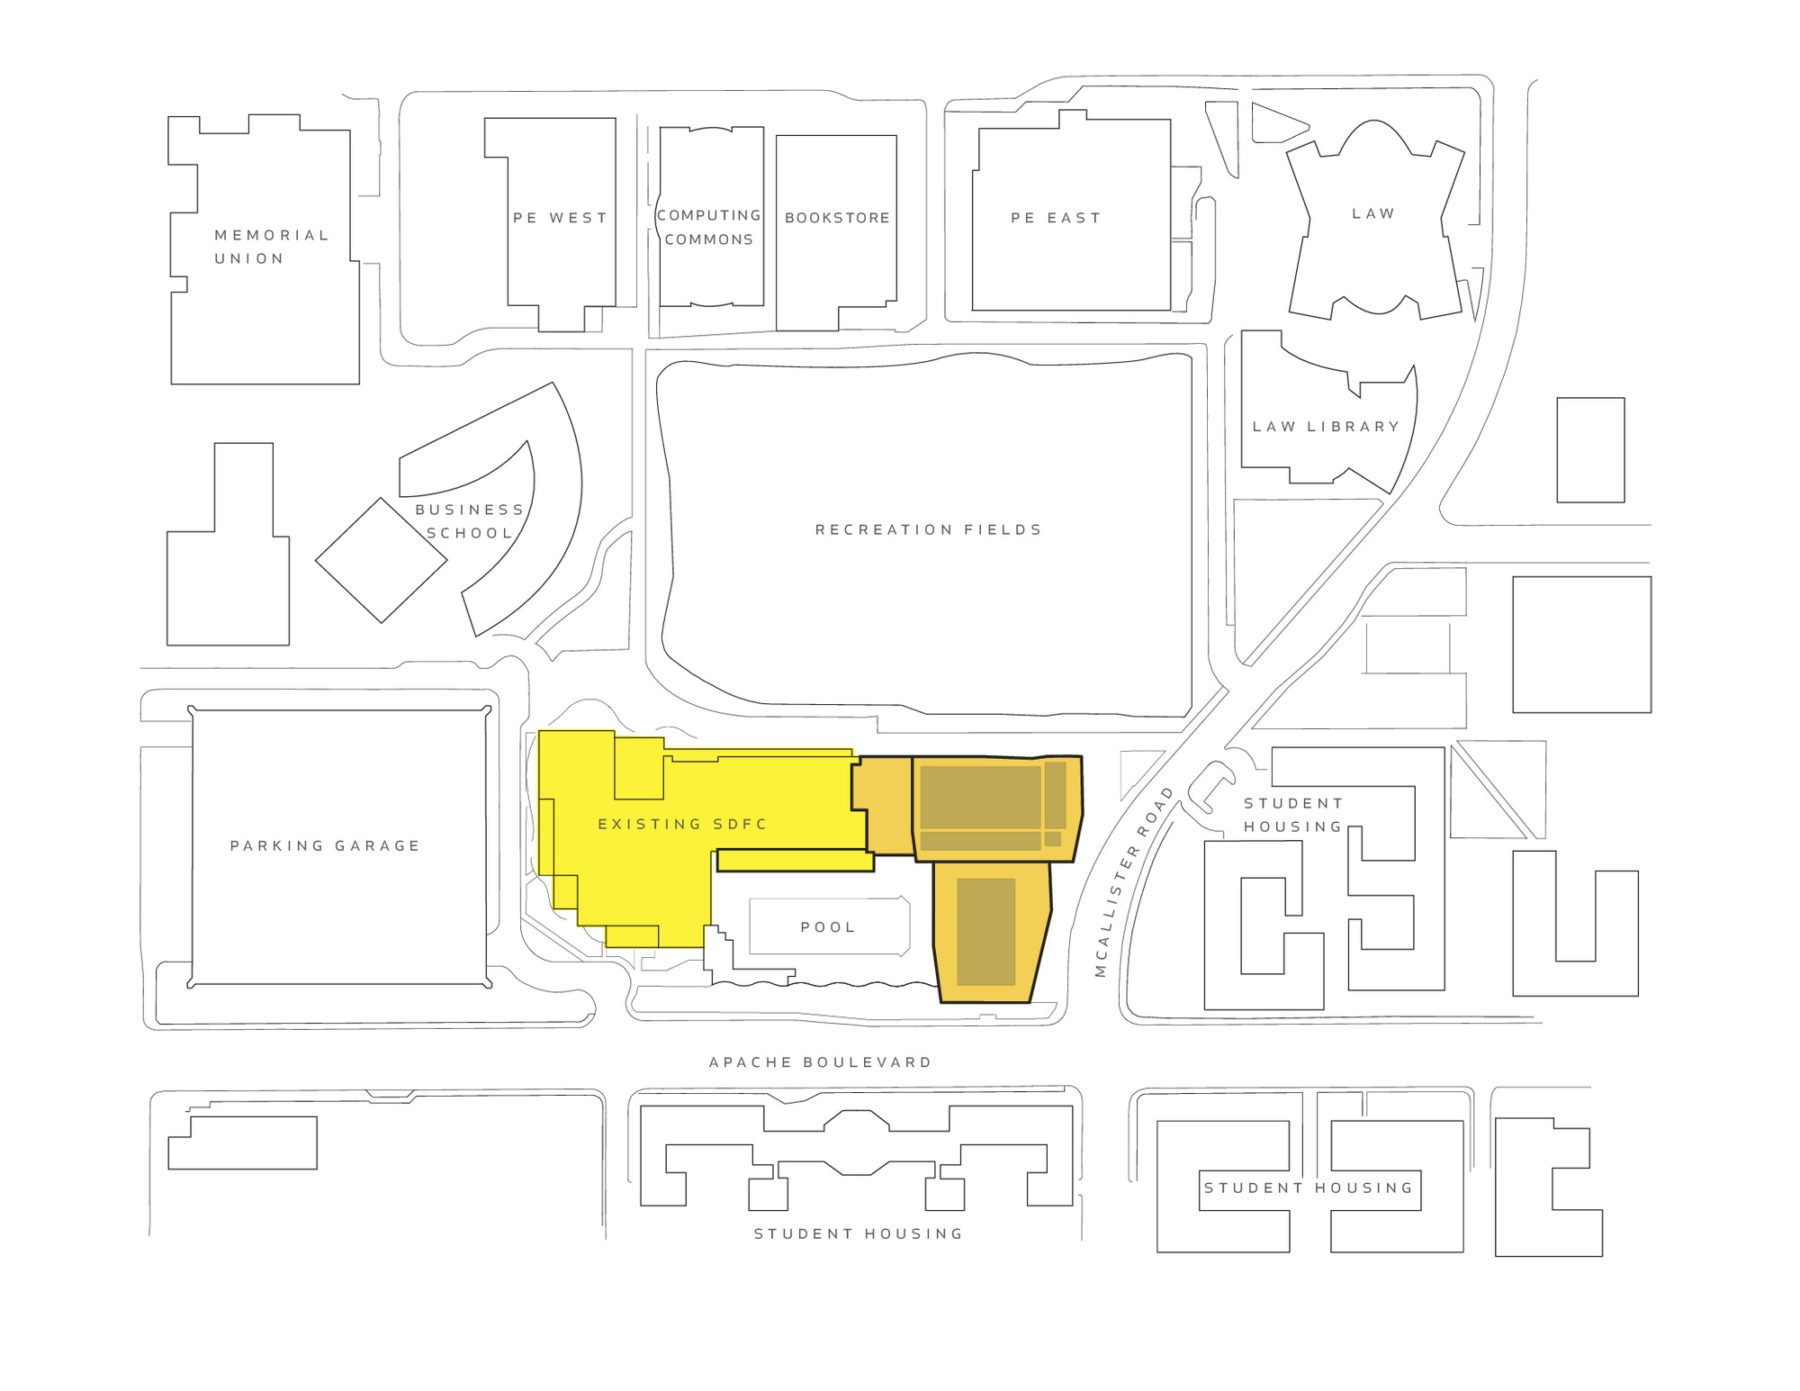 Campus map of fitness complex